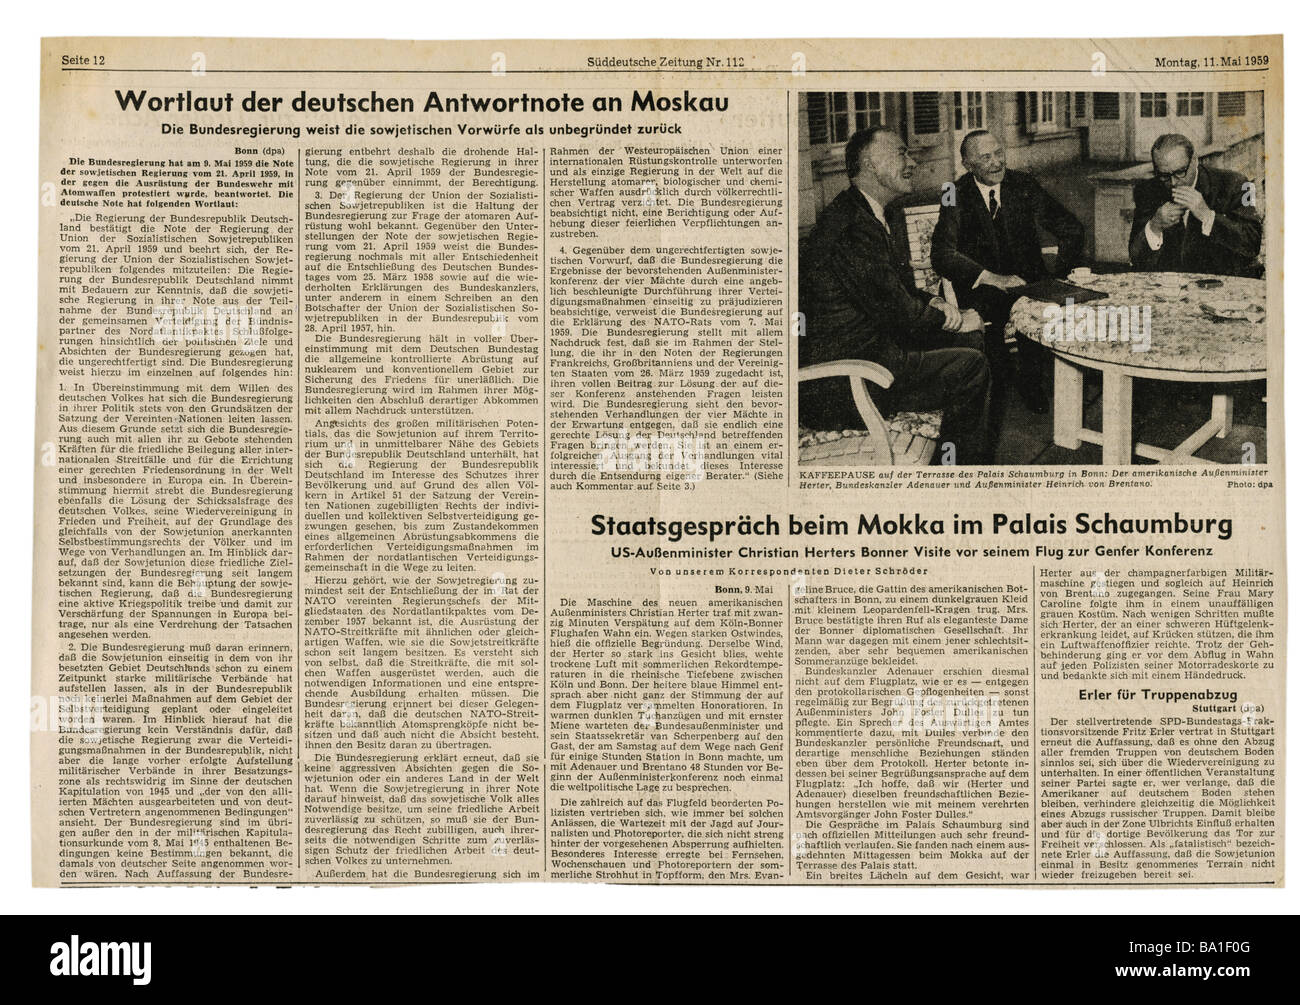 press/media, magazines, 'Süddeutsche Zeitung', Munich, 15 volume, number 112, Monday 11.5.1959, article, German answer to Moscow about allegations of Bundeswehr possessing atomic weapons, Stock Photo